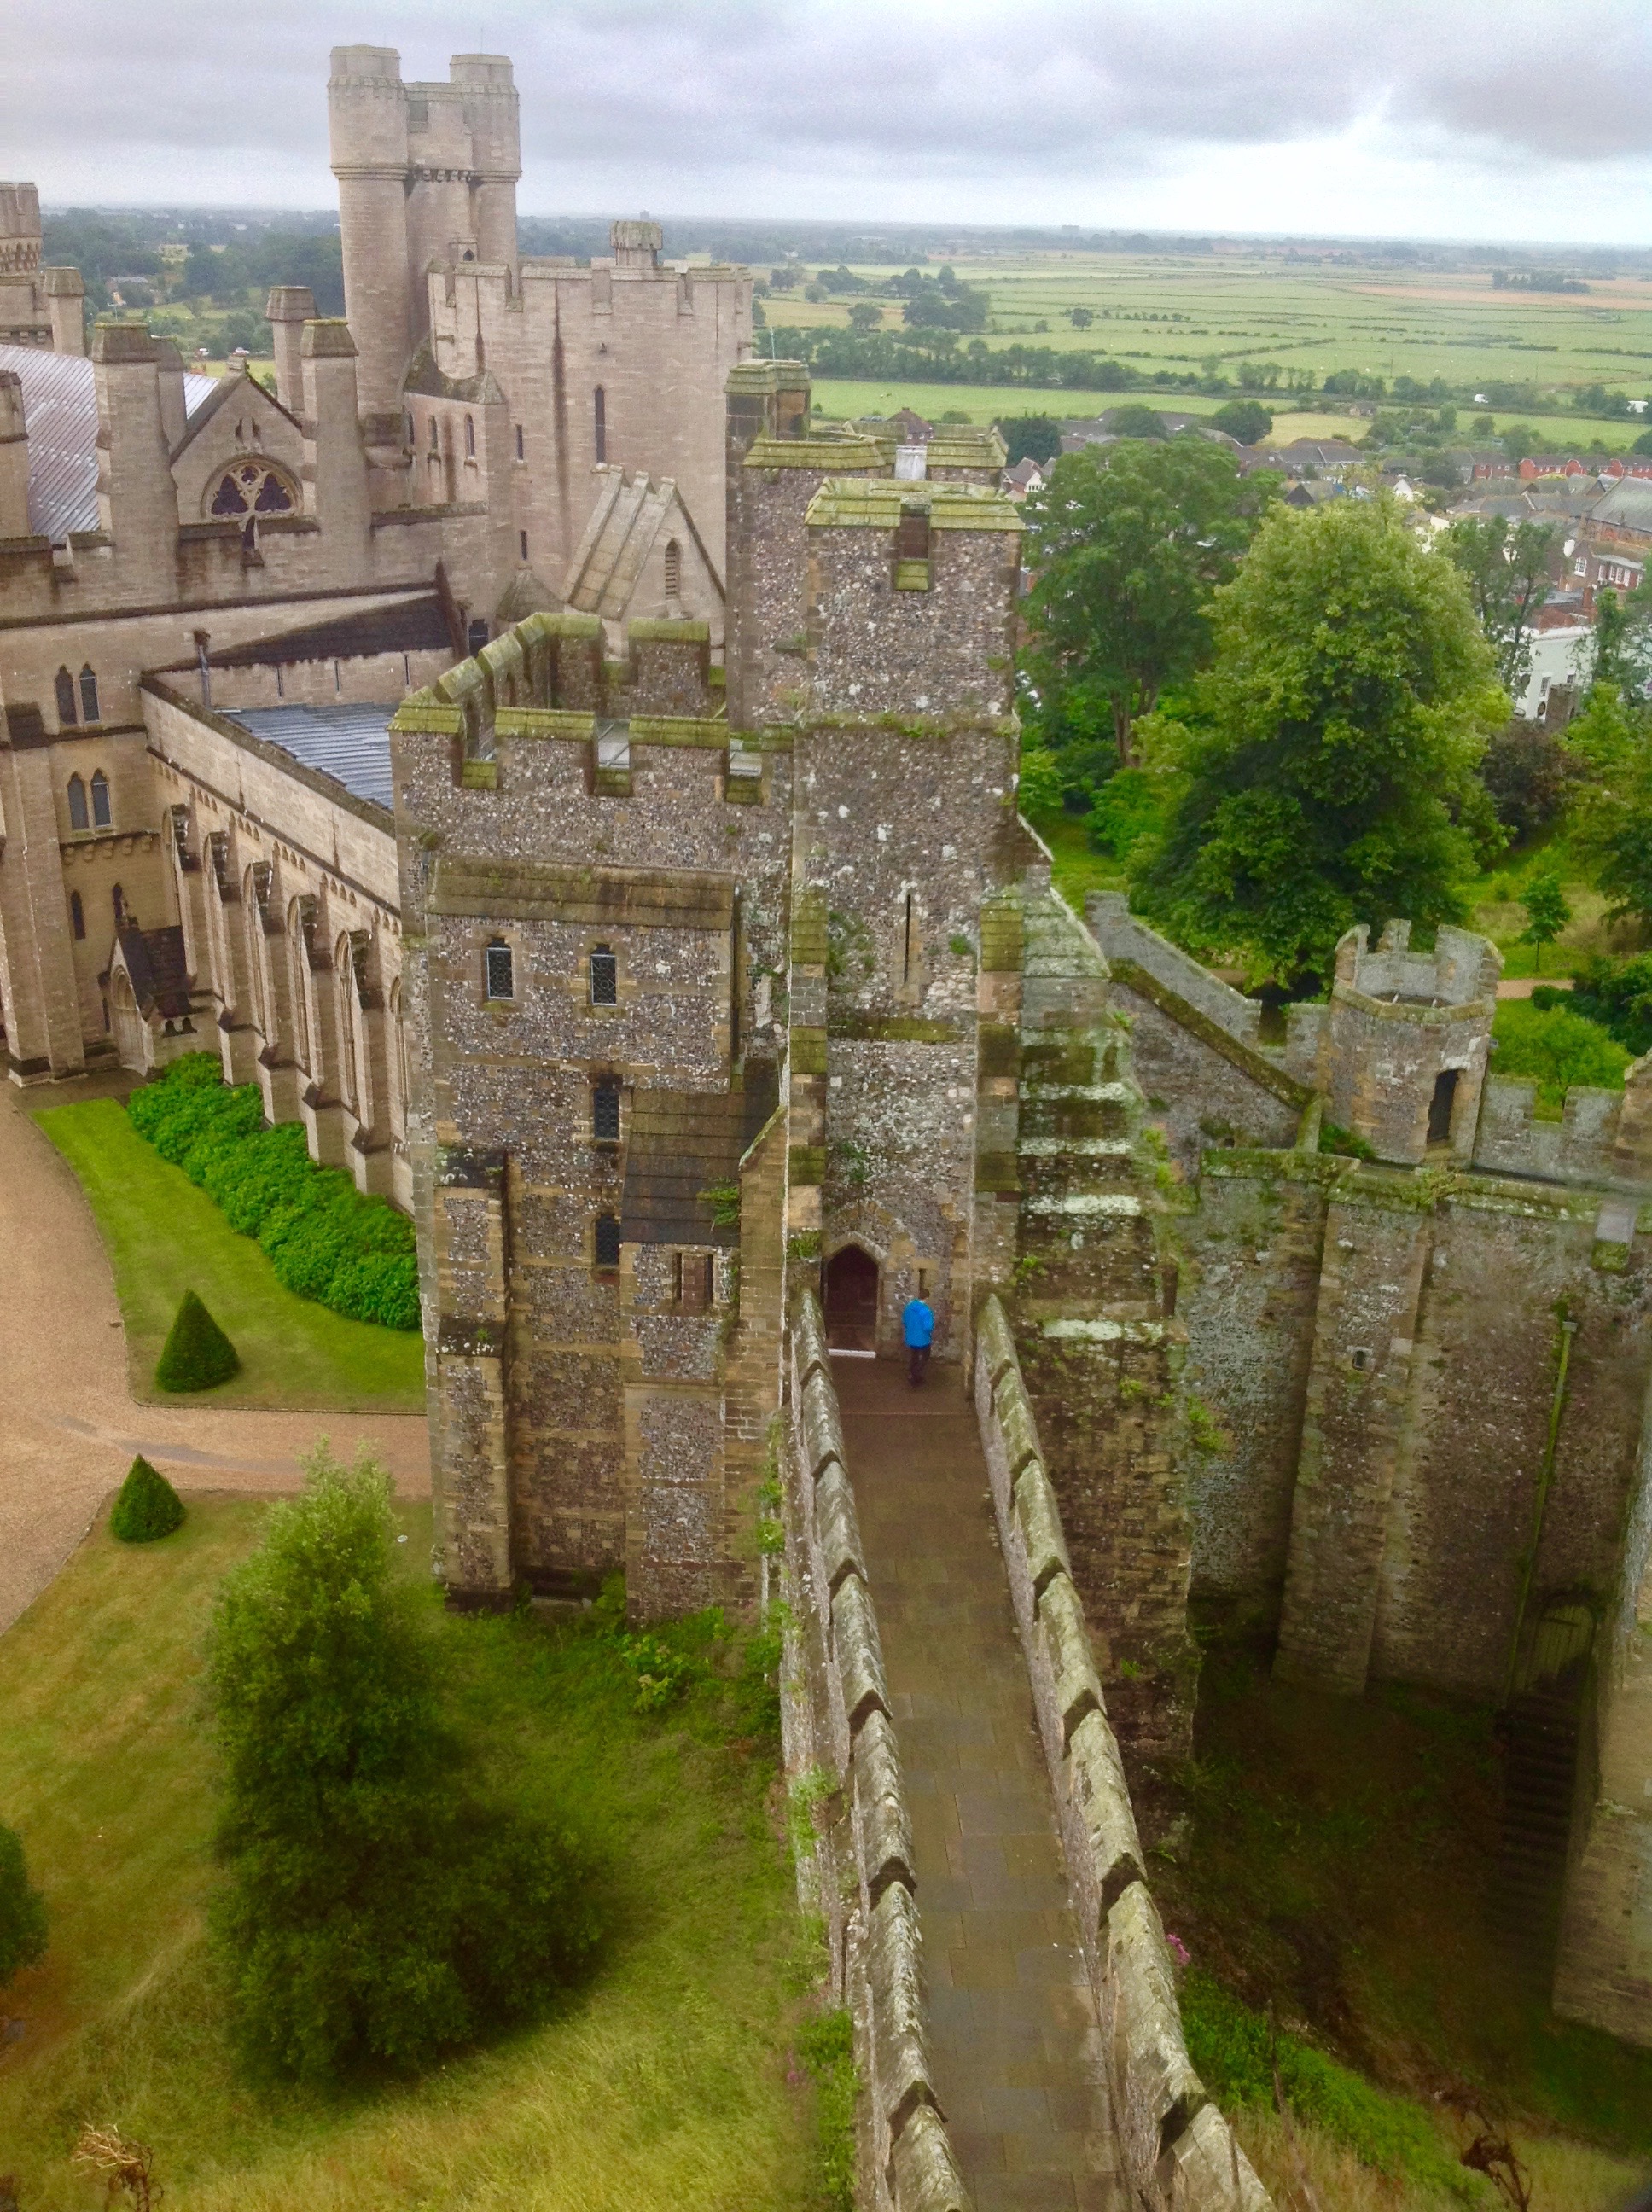 Arundel Castle - view of walkway to the medieval keep. Photo by